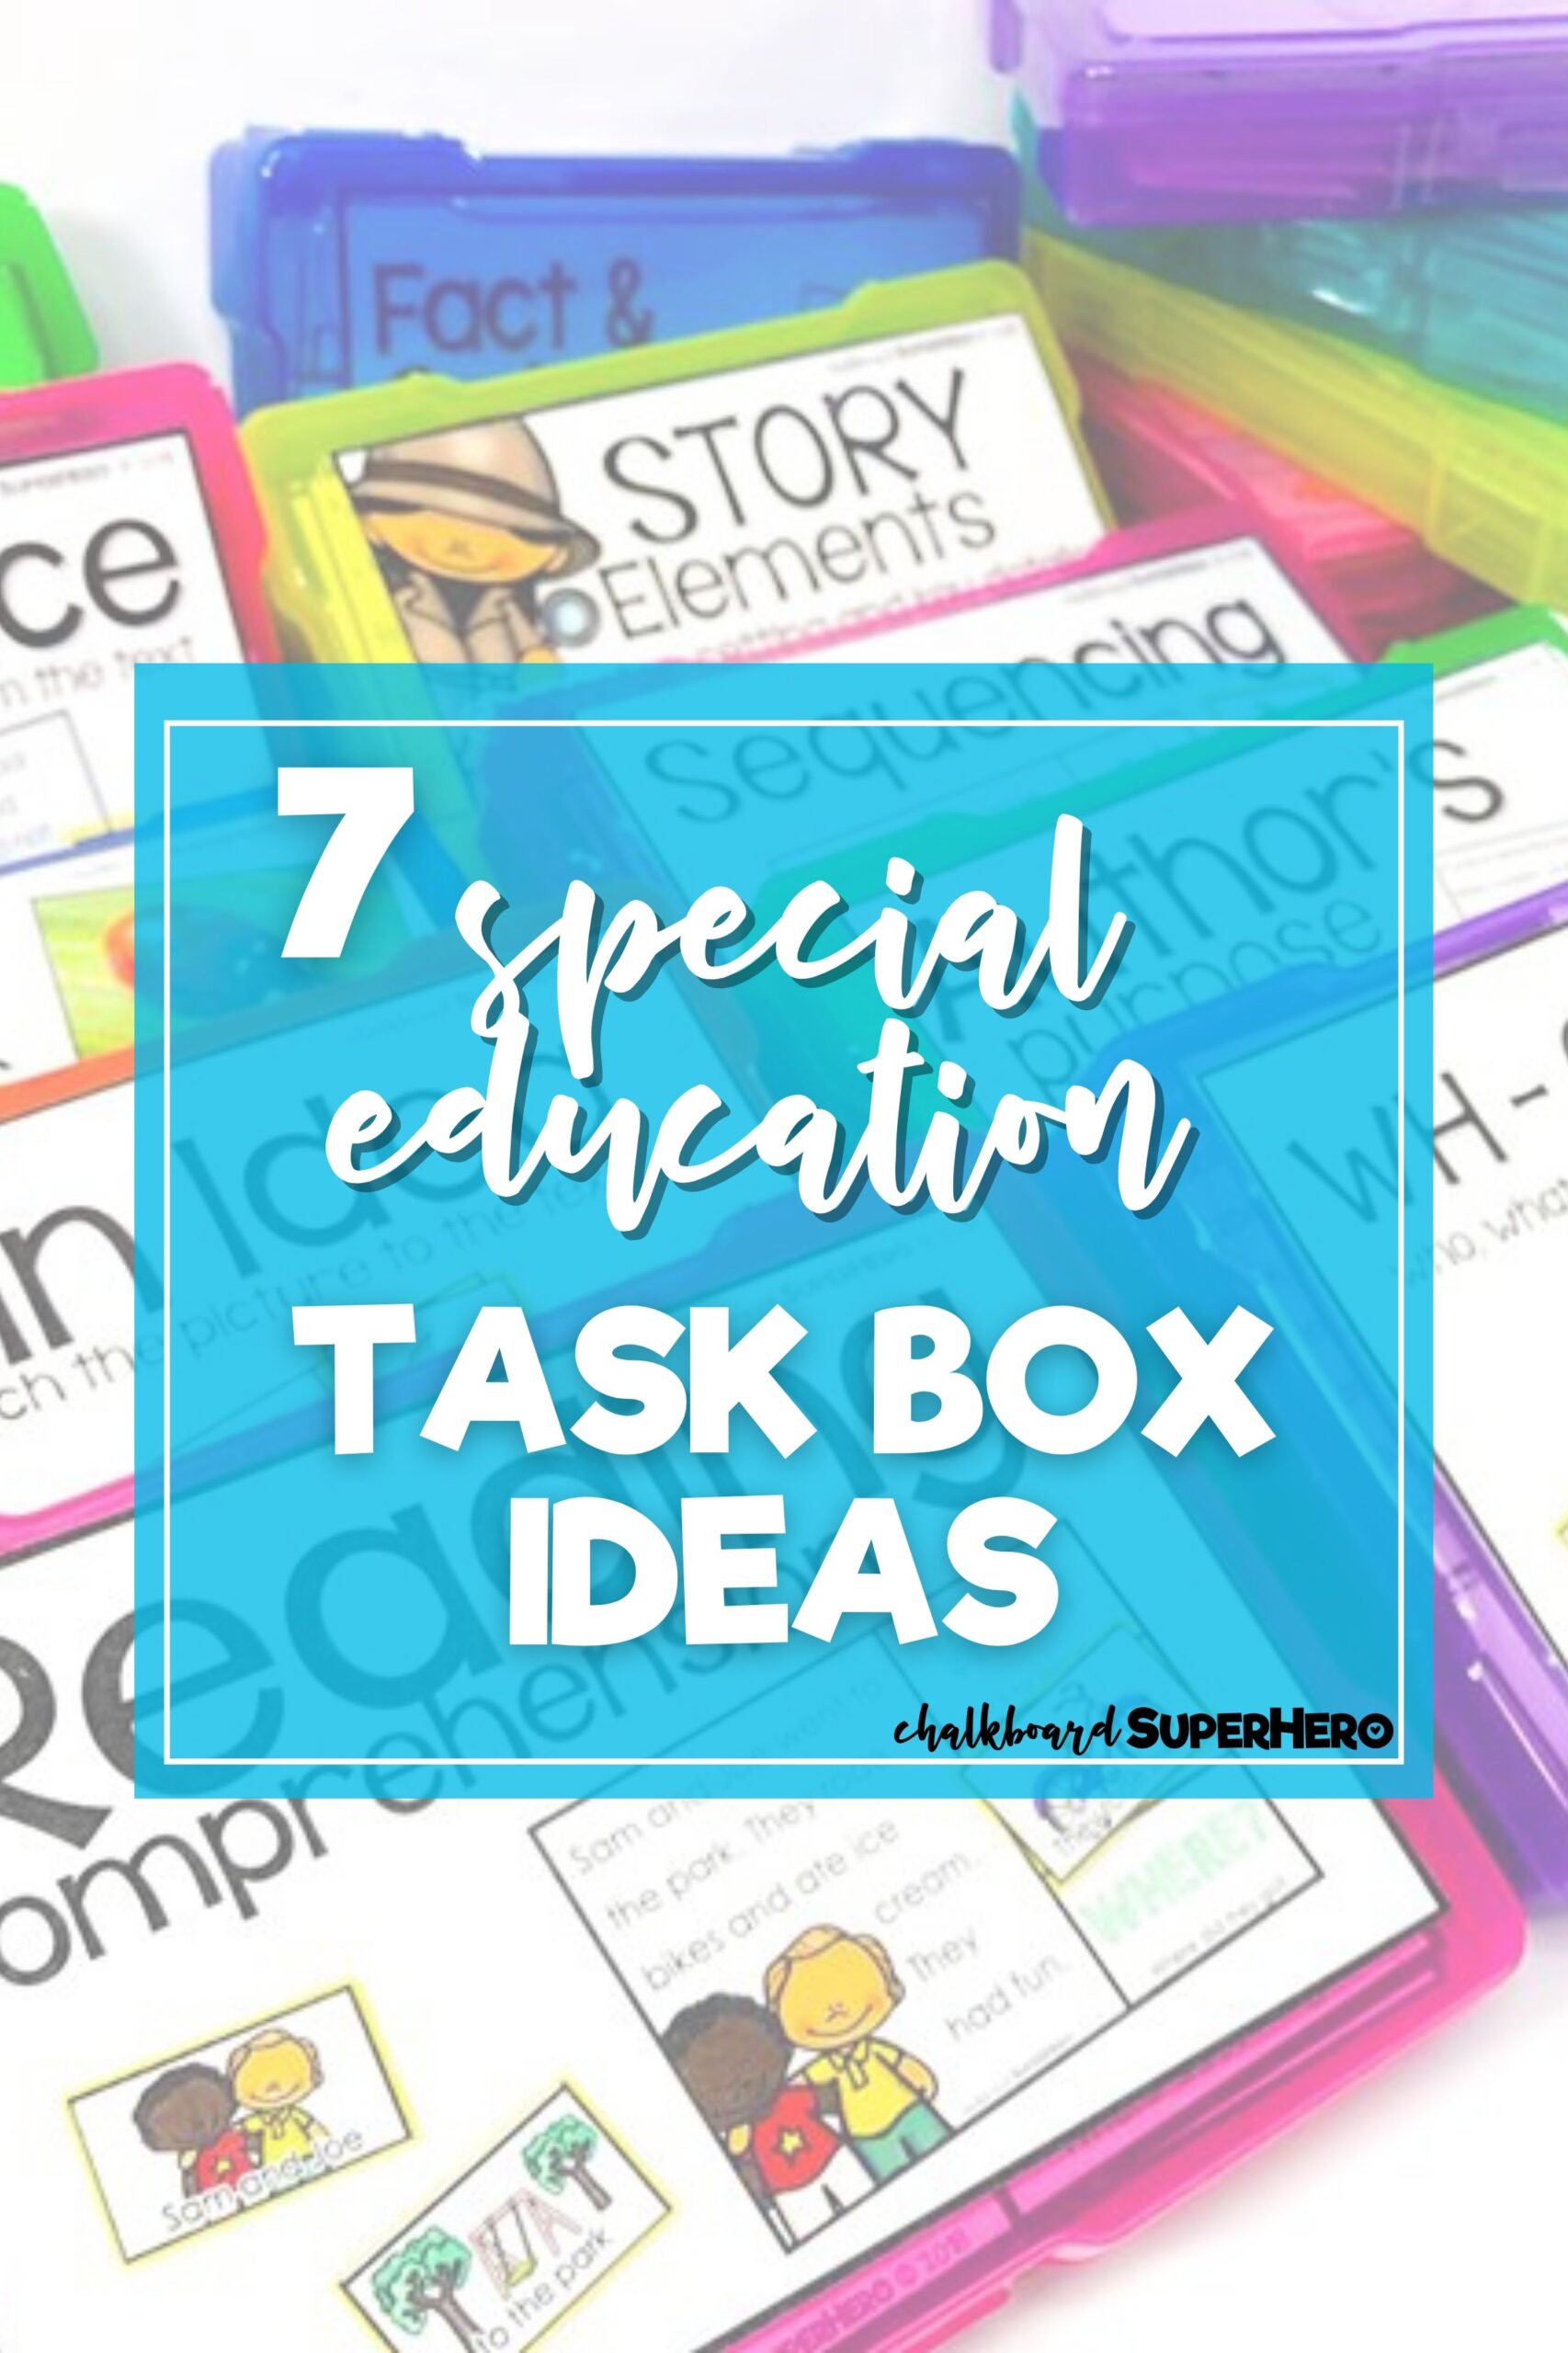 Task Boxes for Special Education - Special Education Journey